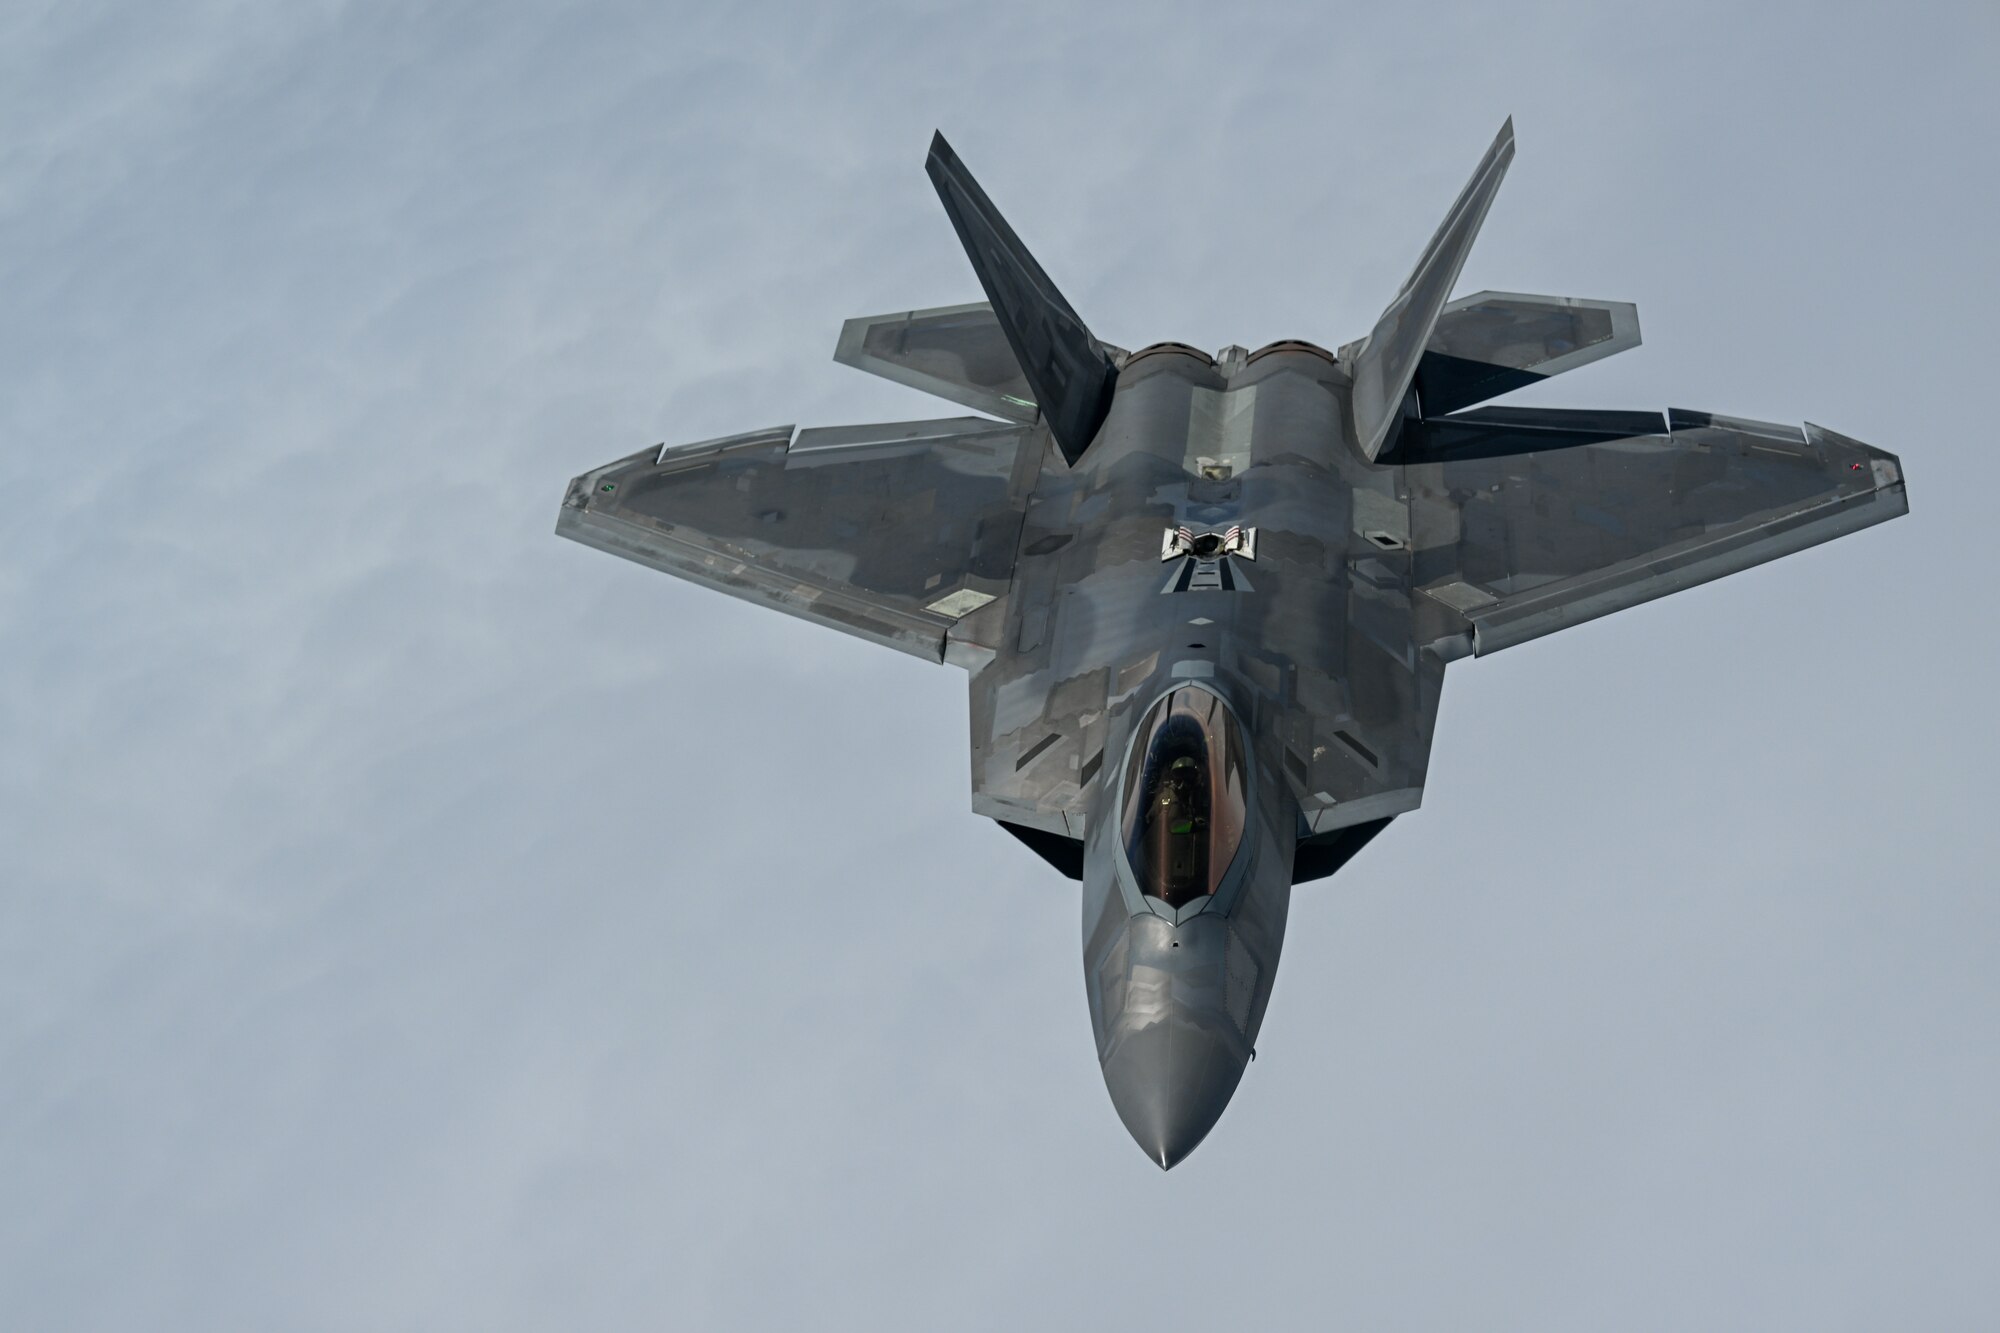 A U.S. Air Force F-22 Raptor, deployed to Kadena Air Base, Japan, approaches a KC-135 Stratotanker assigned to the 909th Air Refueling Squadron, Kadena AB, for aerial refueling, June 10, 2022. Kadena Air Base regularly hosts visiting joint, allied and partner forces to conduct missions to enhance our operational readiness to defend Japan and ensure a free-and-open Indo-Pacific. (U.S. Air Force photo by Tech. Sgt. Corban Lundborg)